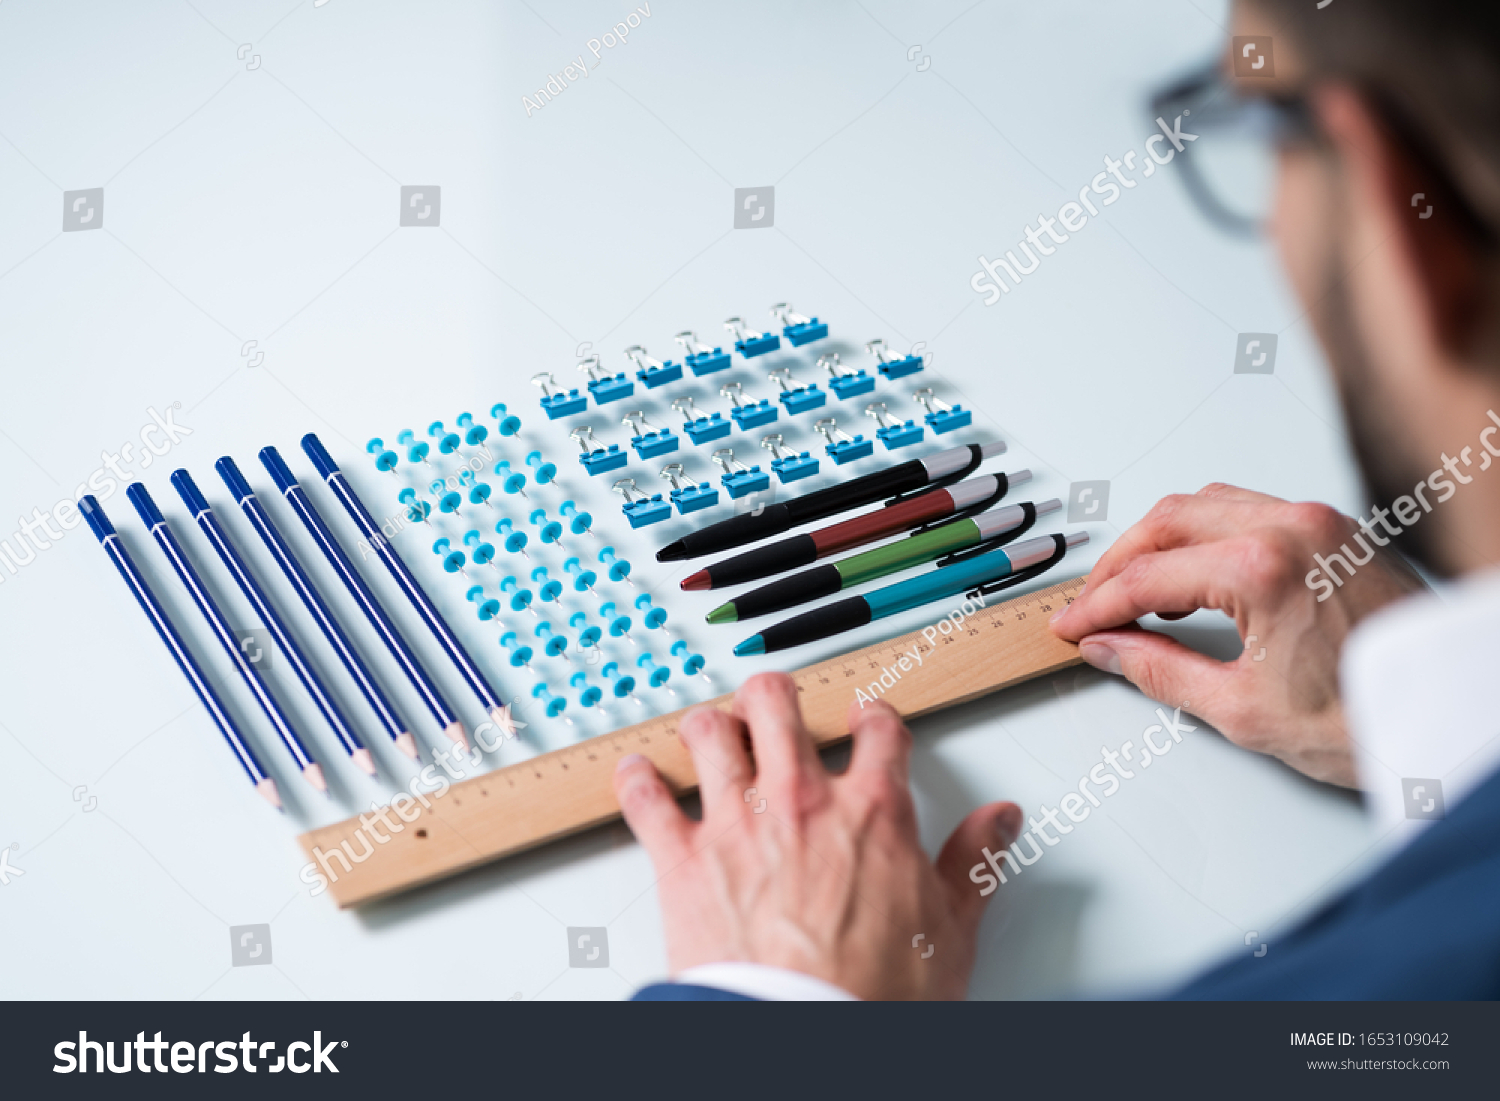 A Person's Hand Arranging Pencils And Multi Colored Pushpins In A Row On White Background #1653109042